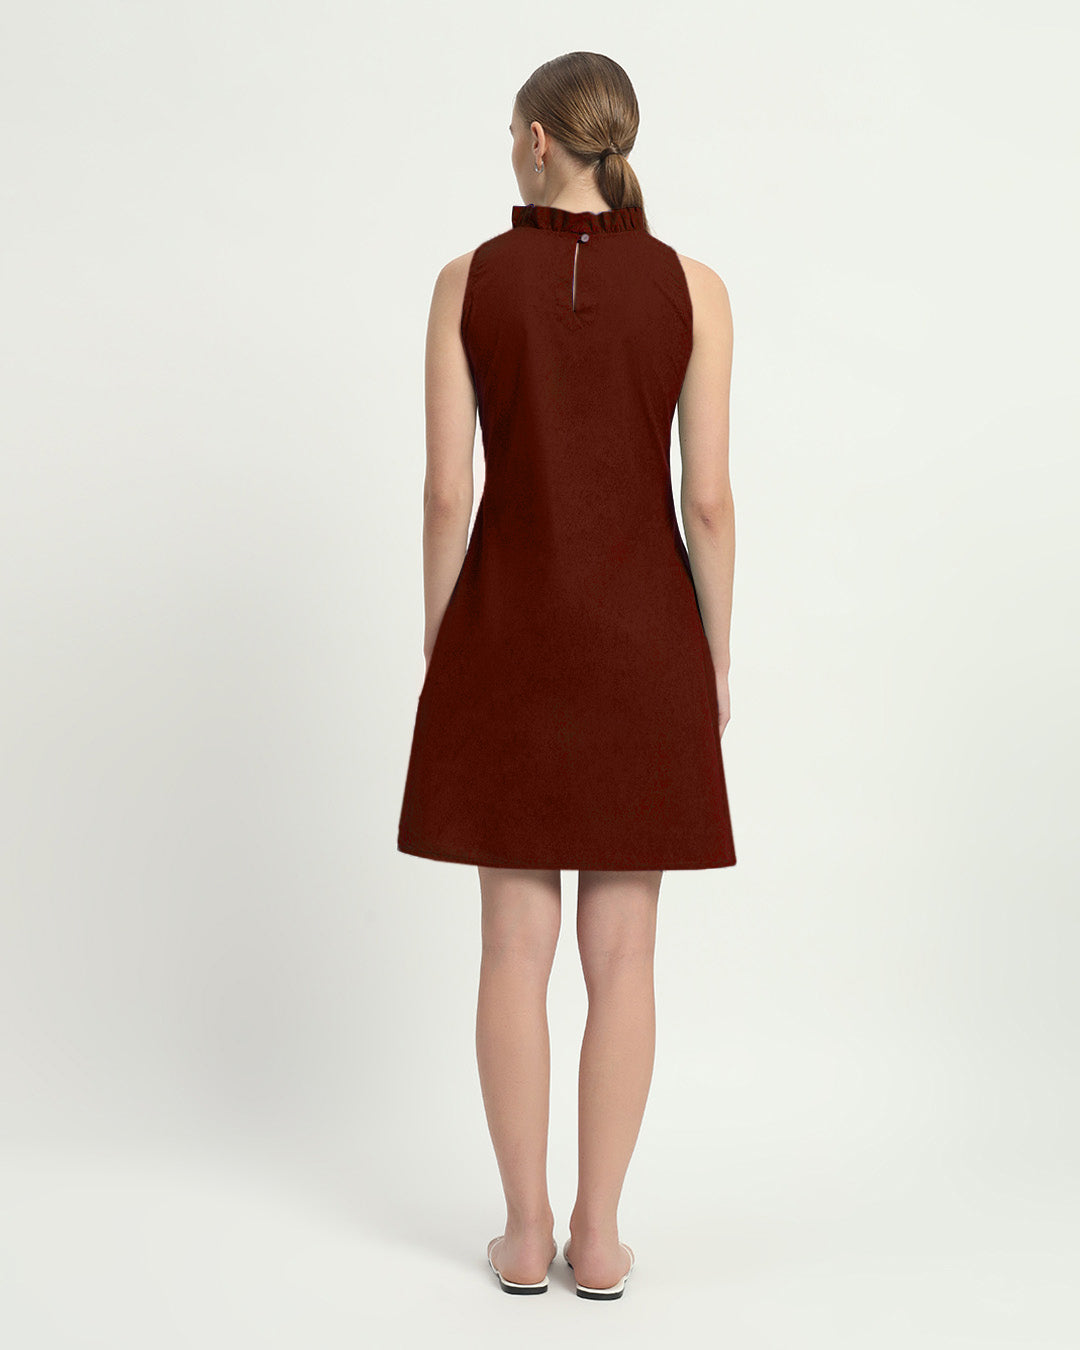 The Rouge Angelica Cotton Dress